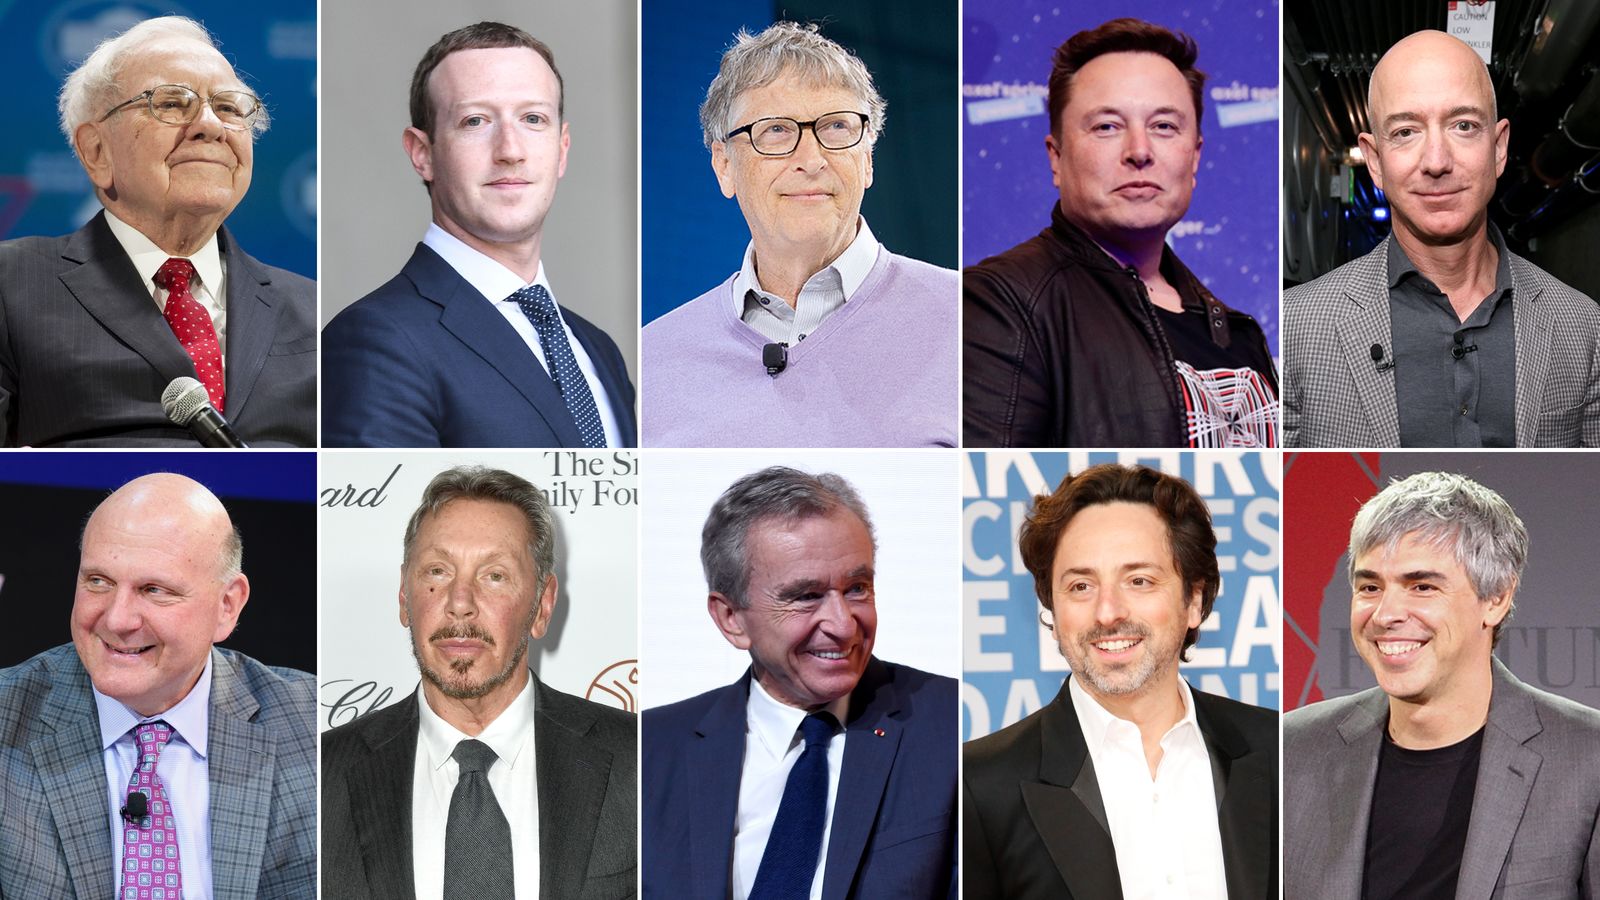 Billionaires Became $5 Trillion Richer During the Pandemic: Forbes